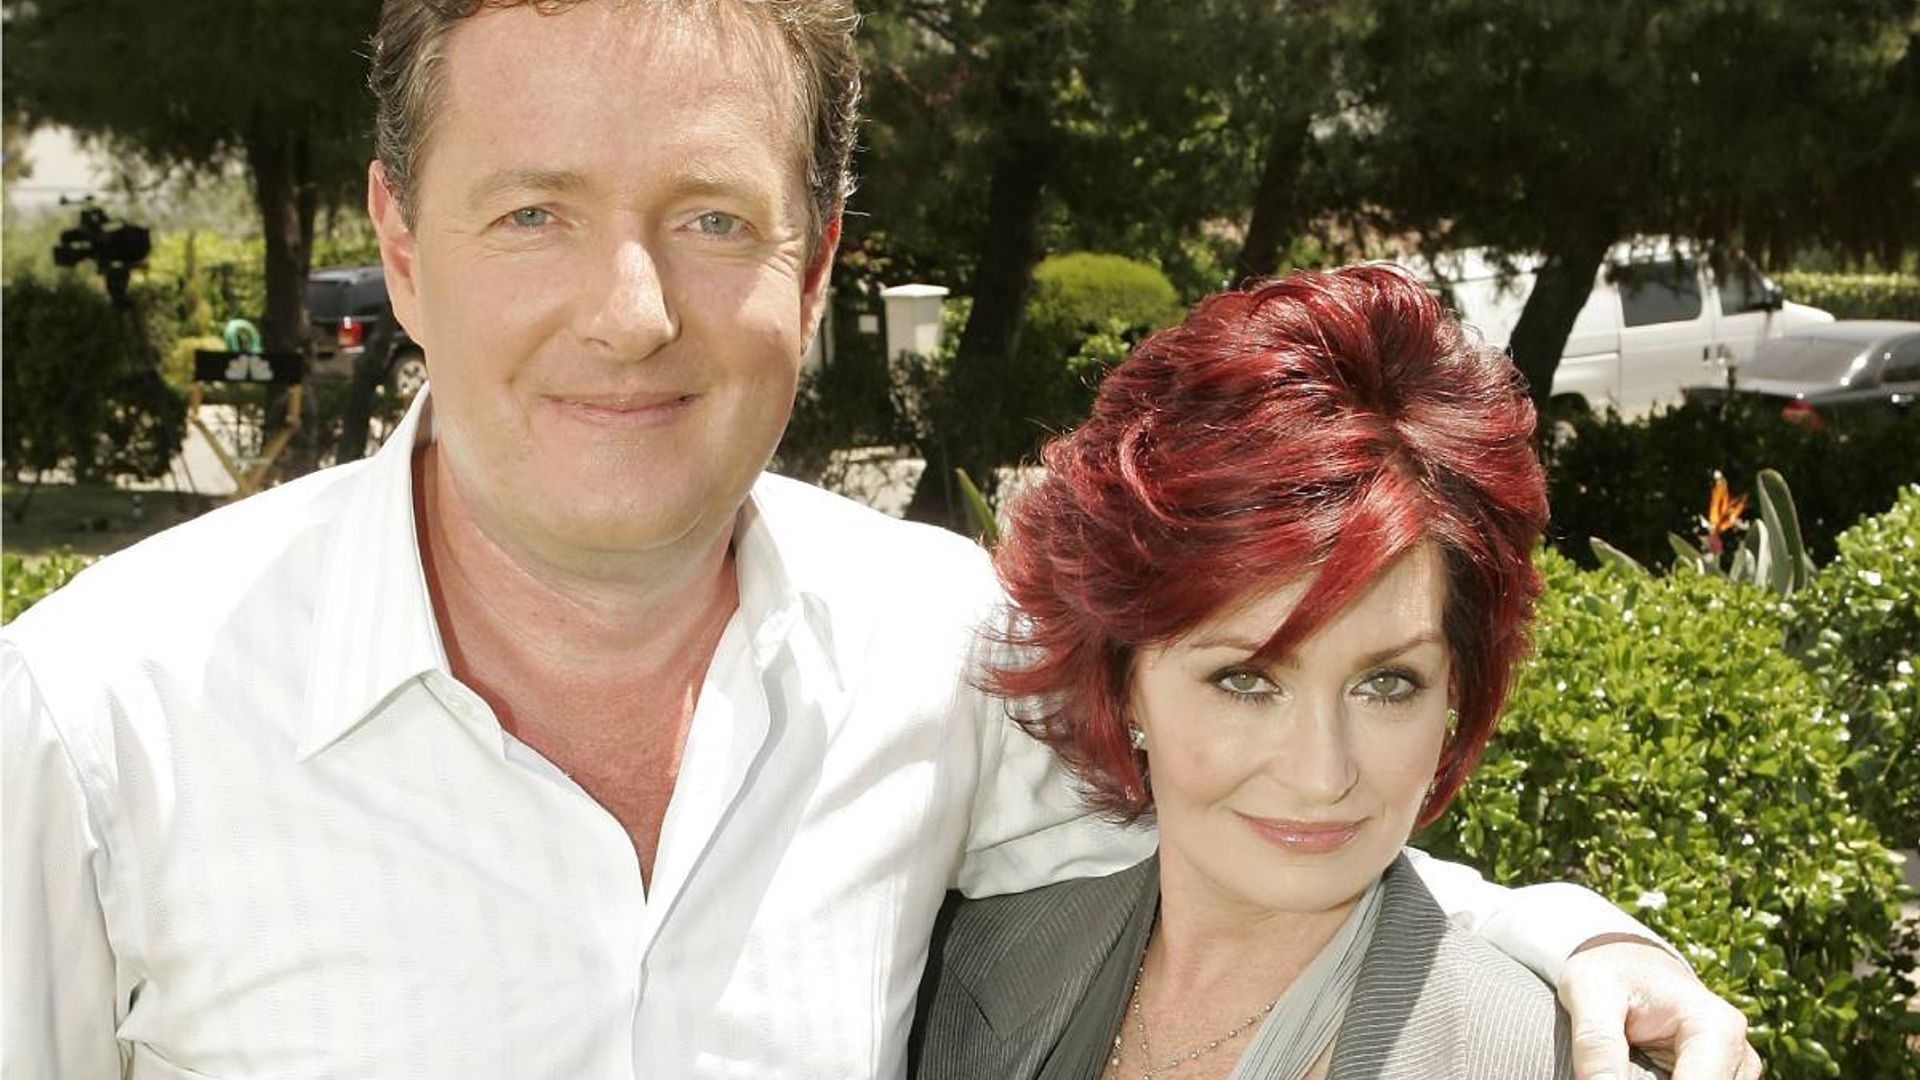 Sharon Osbourne pays sweet tribute to Piers Morgan on special day